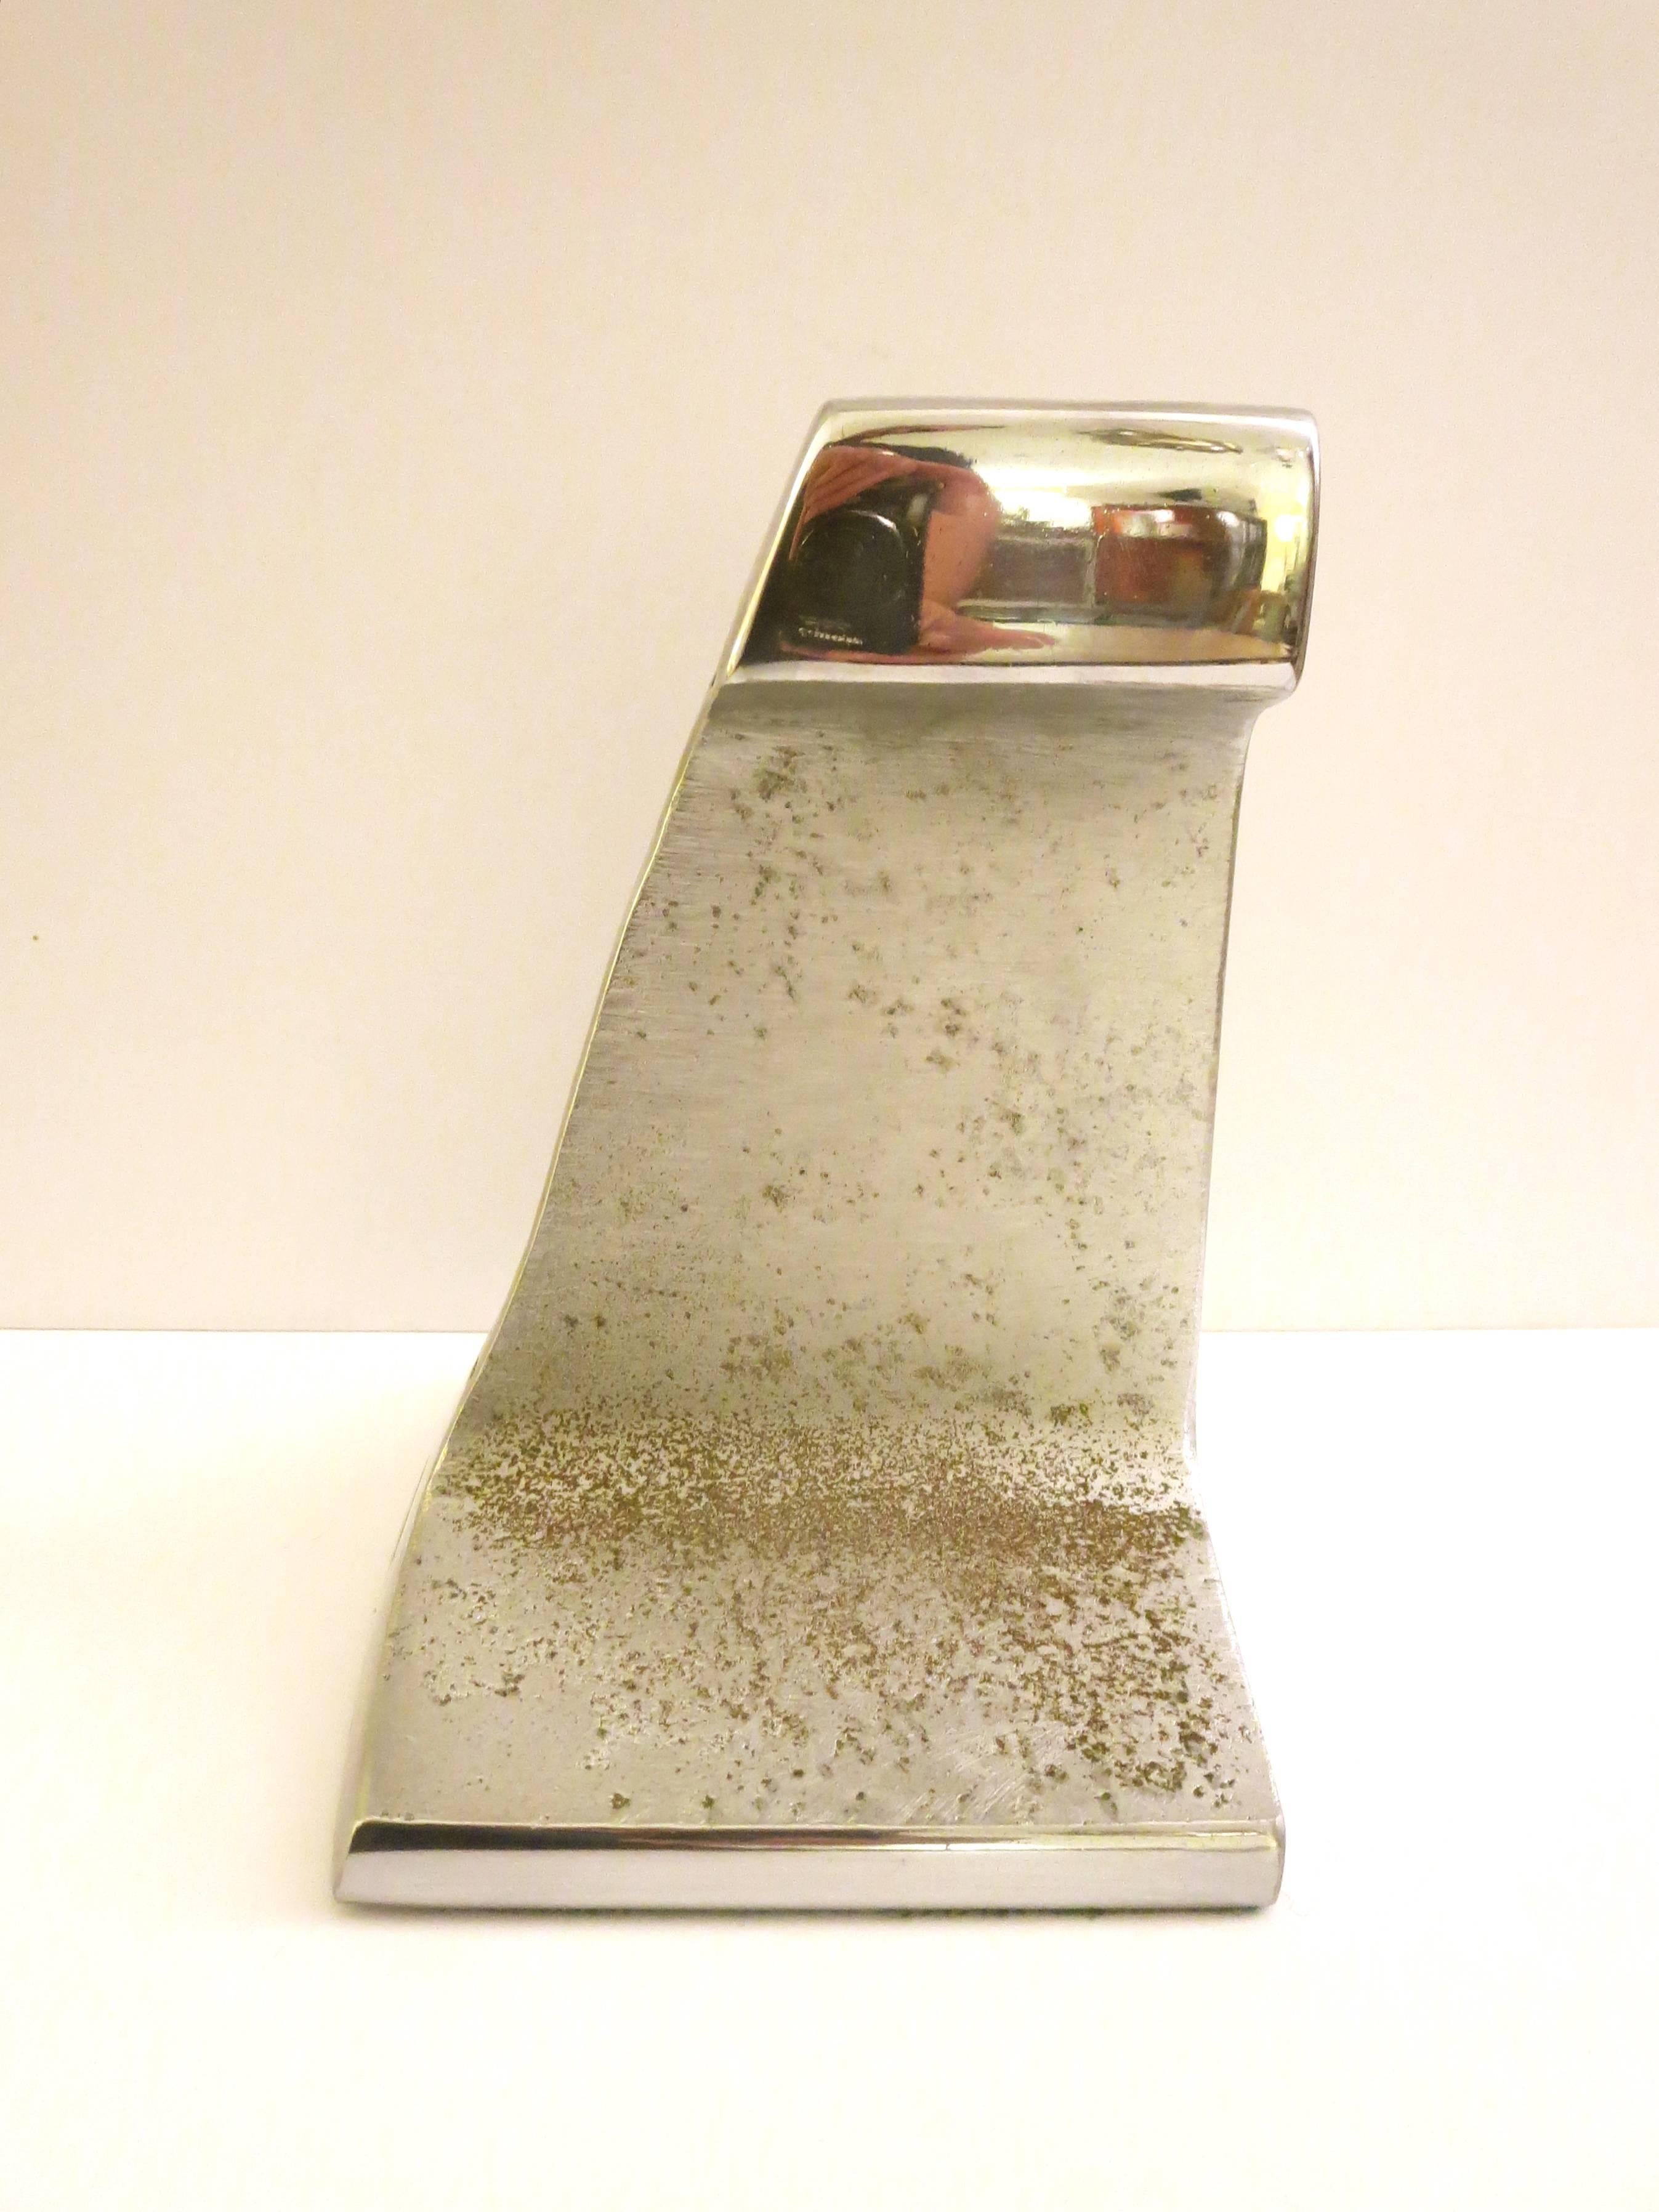 Rare solid I-beam steel bookend, chrome-plated nice original condition solid and heavy can be used as a door stopper, the chrome its nice and shiny on the middle its rough finish.